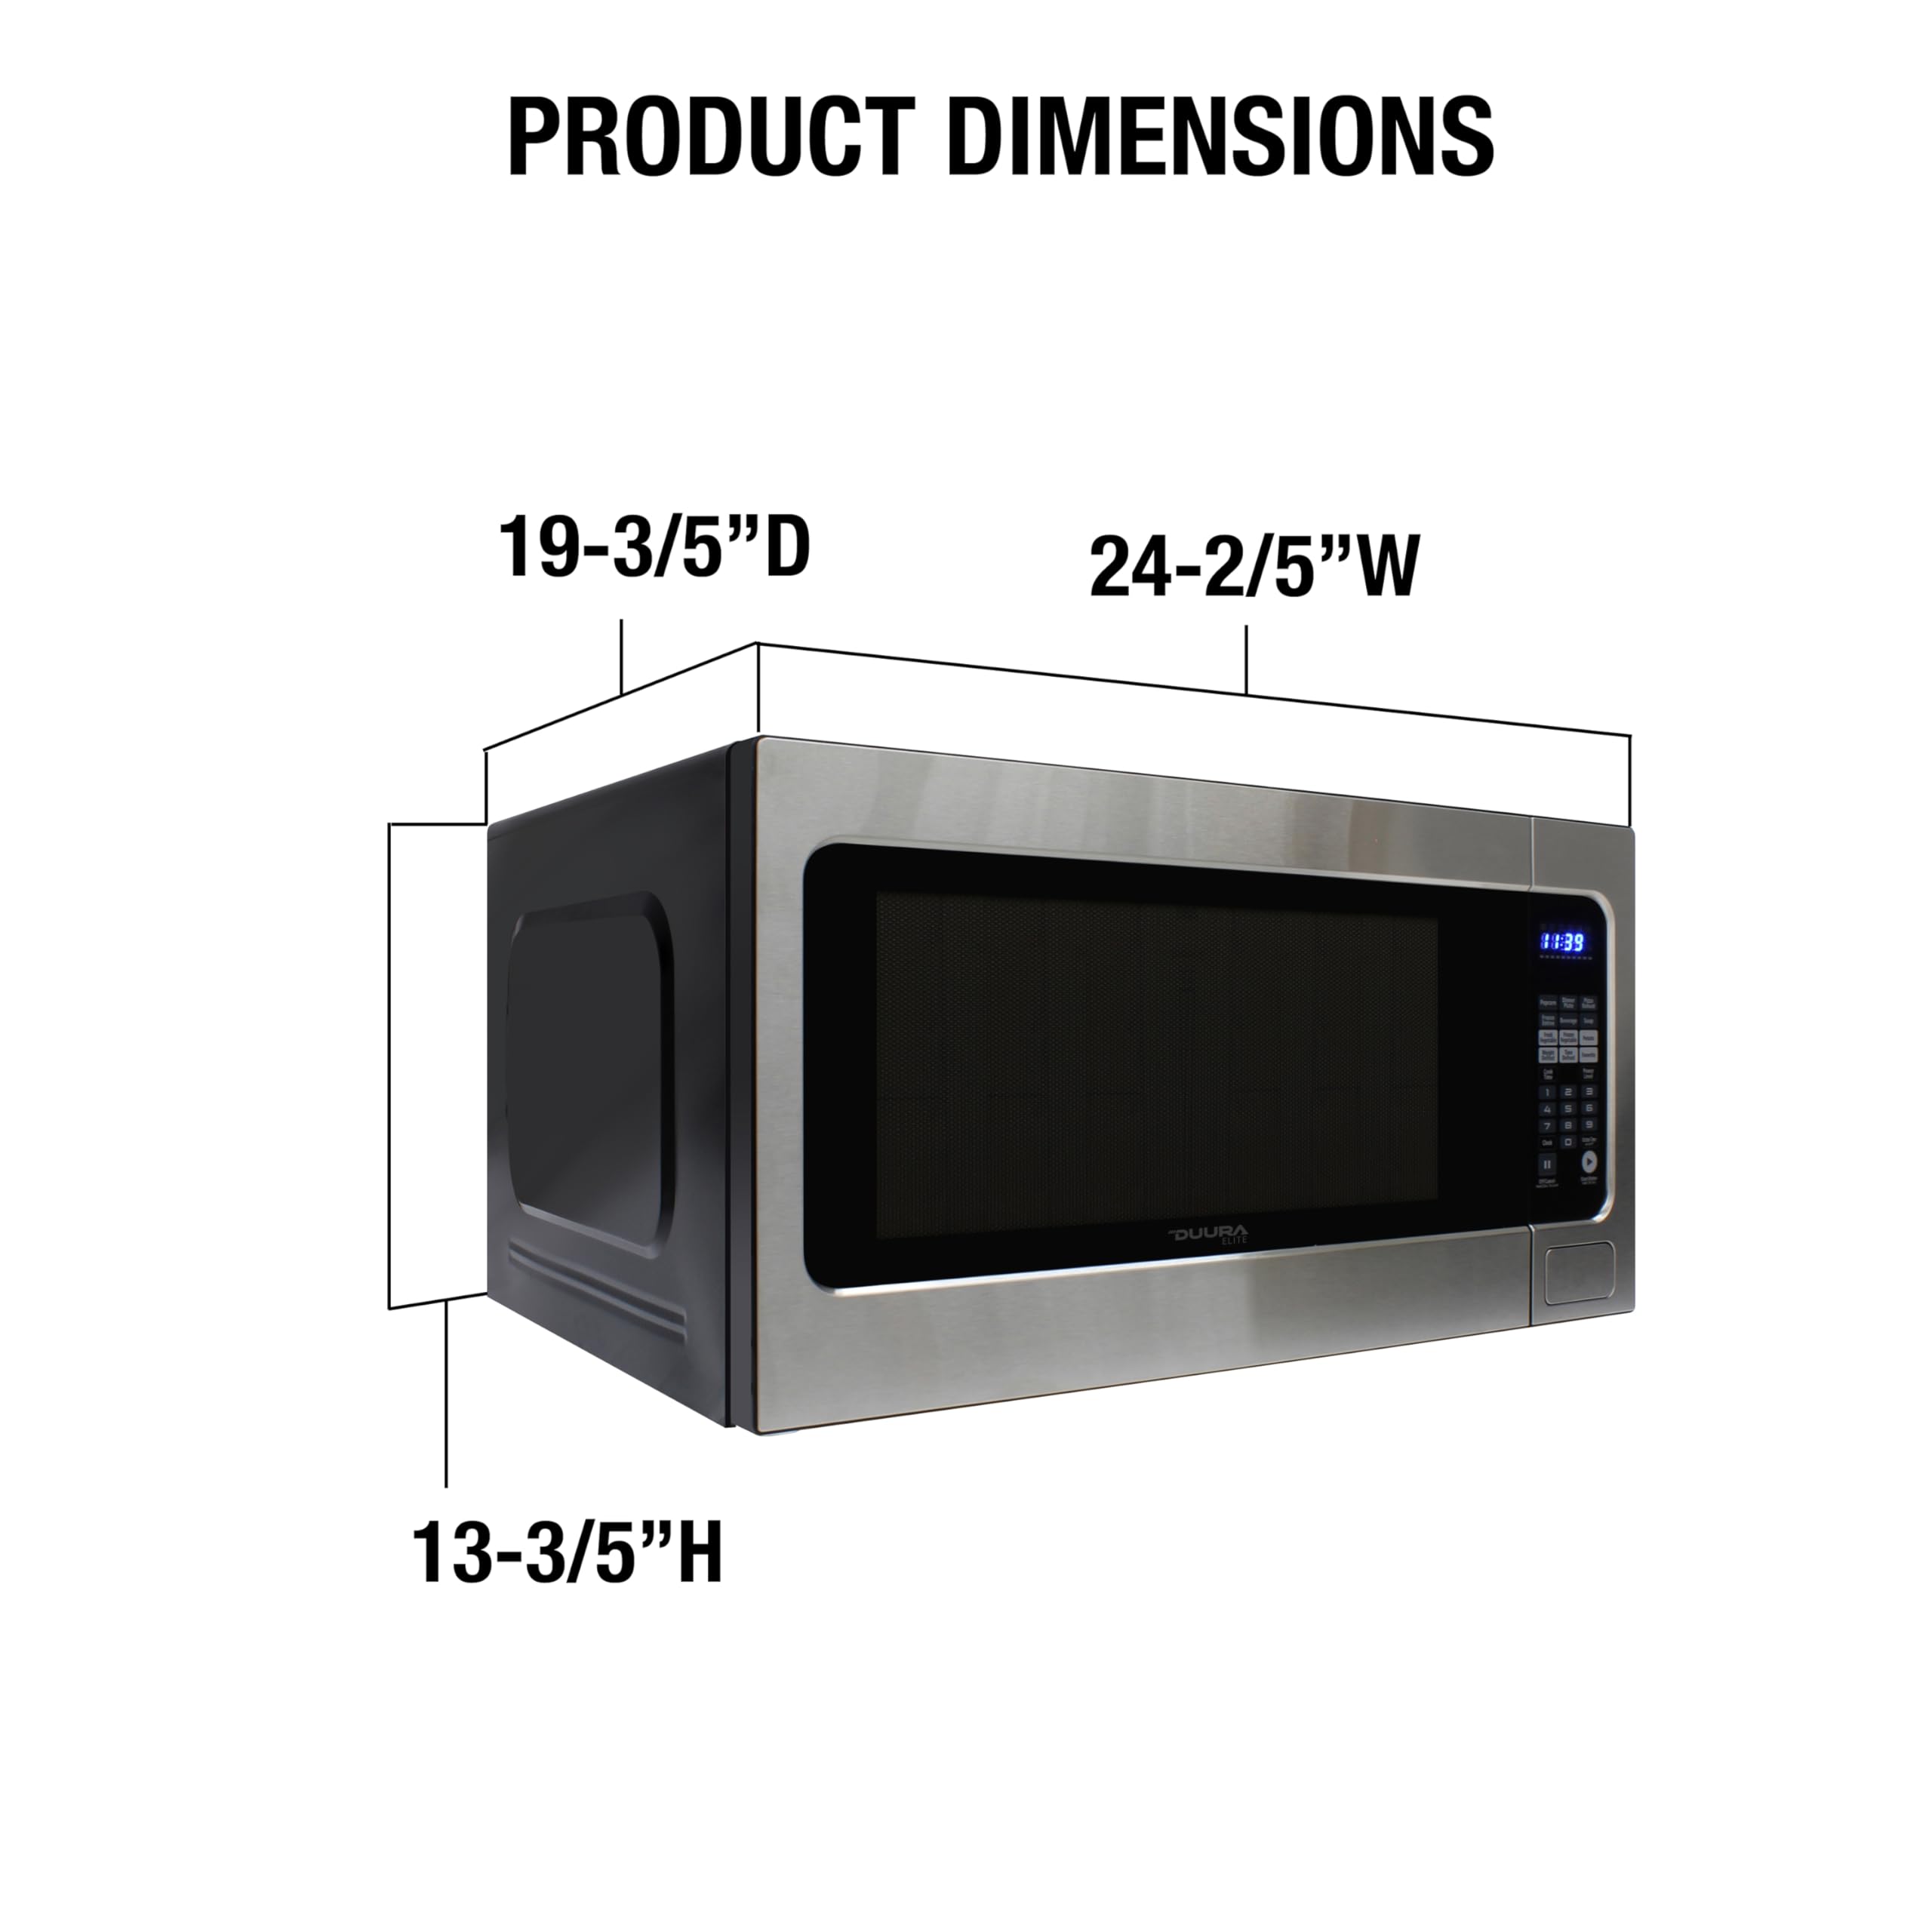 DUURA Elite DE220MWTSSS Microwave Oven Built-in 1200-Watts with 10 Power Levels Pre Settings and Express, Sensor and Speed Cooking and Silent Mode with Glass Turntable, 2.2-Cu.Ft, Metallic